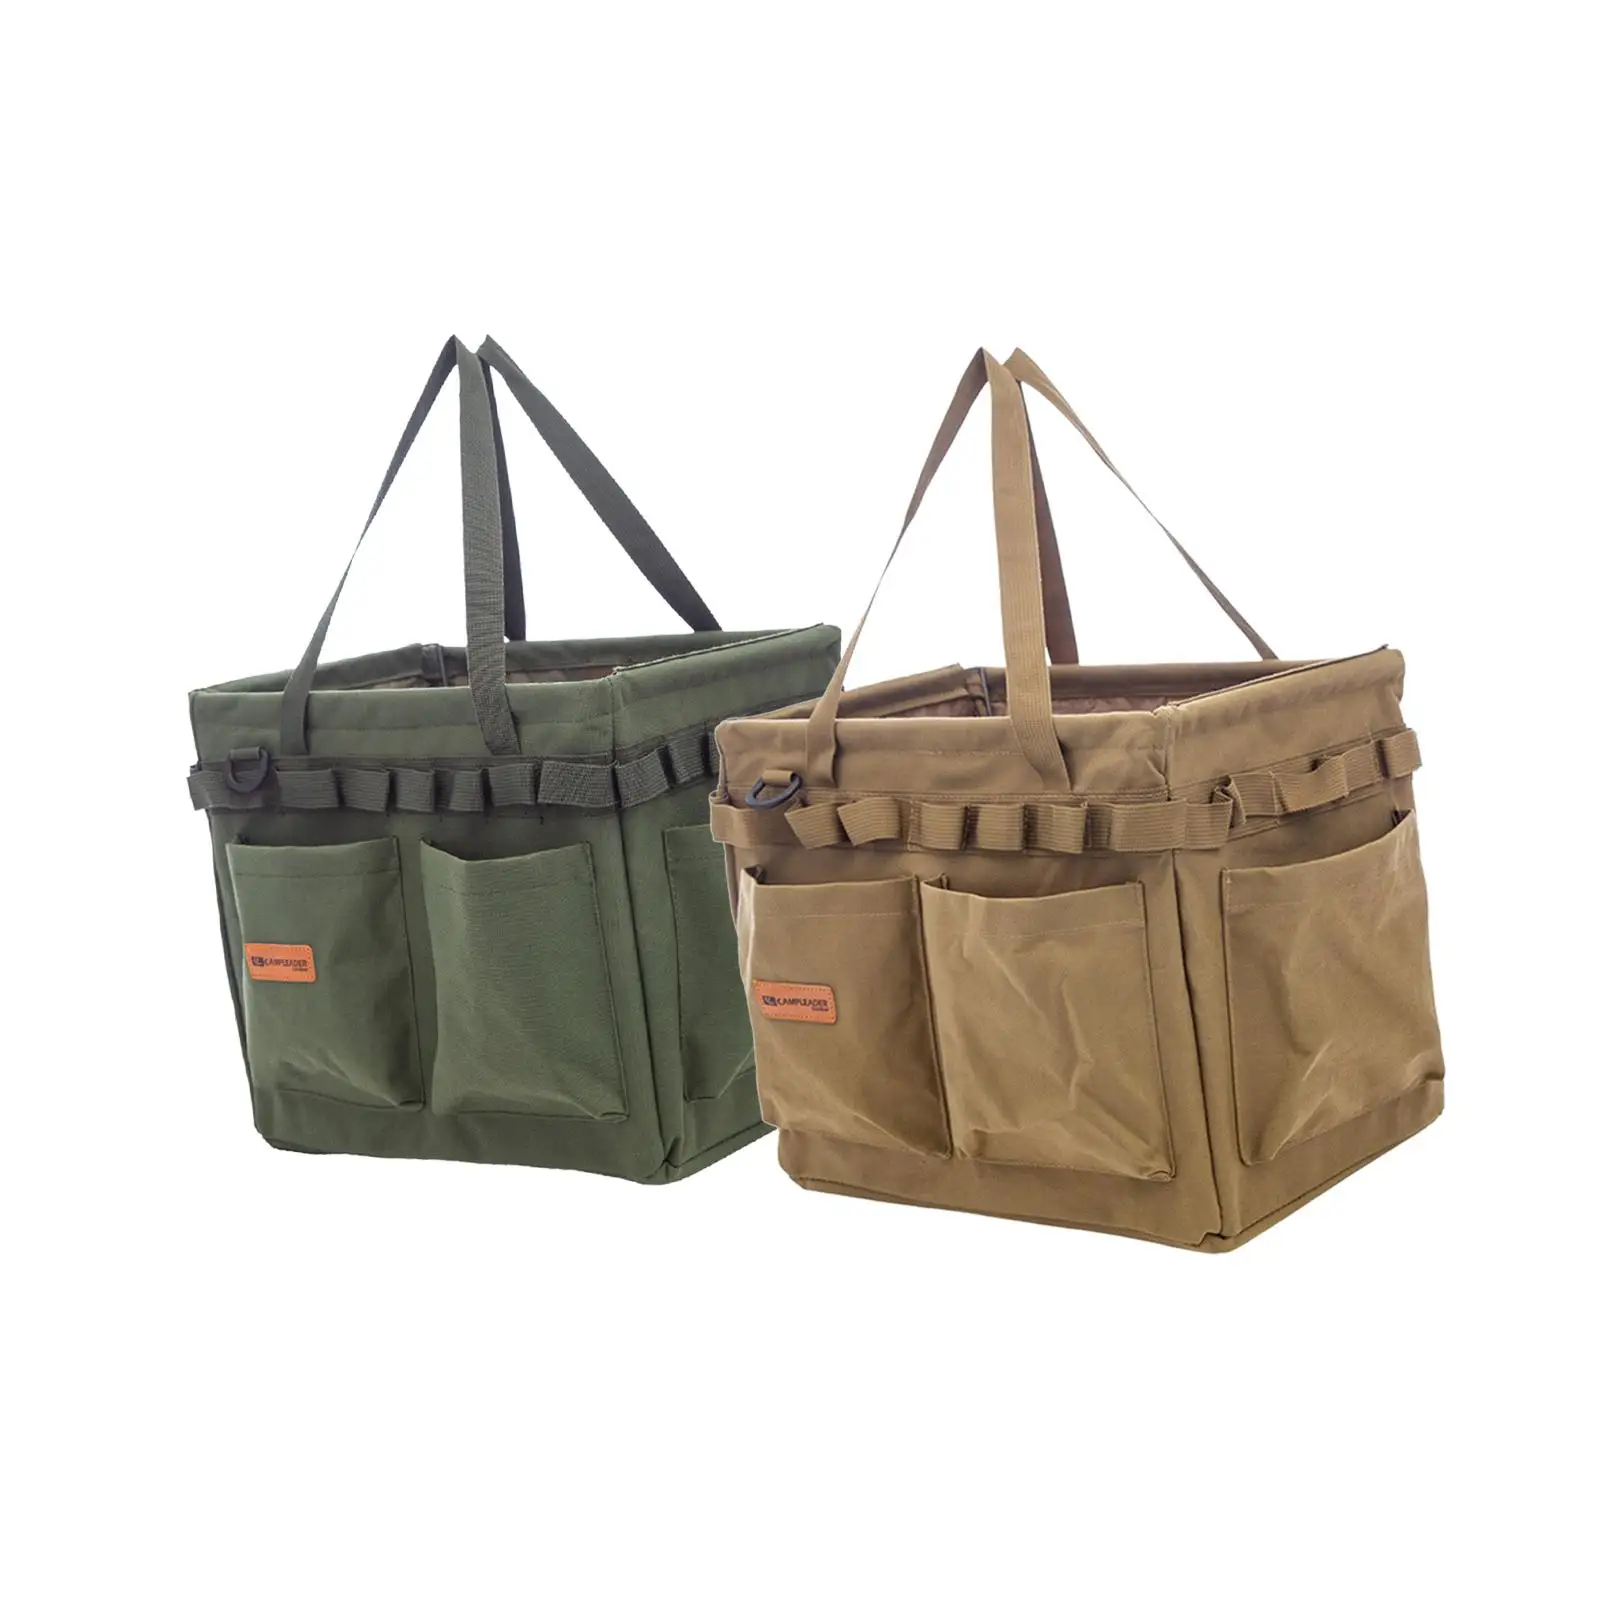 Outdoor Tool Storage Bag Foldable Tote Bag Camping Equipment Accessories Picnic Basket Storage Bag for Indoor Outdoor Home Beach